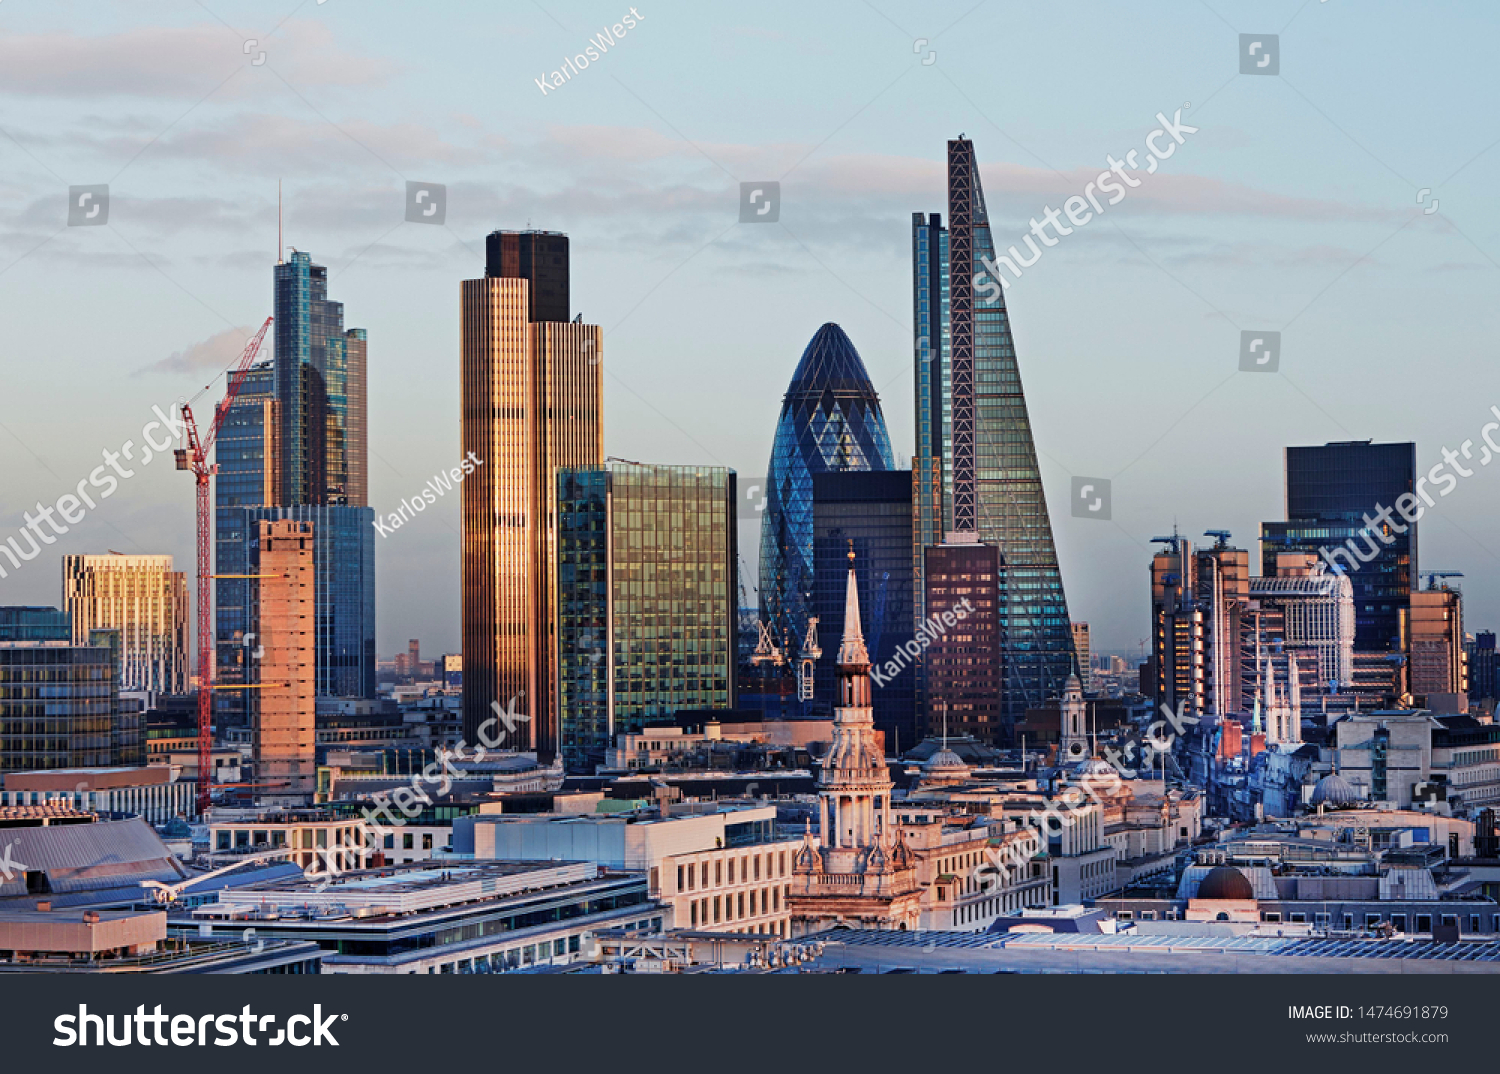 Elevated view of the City of London at dusk #1474691879